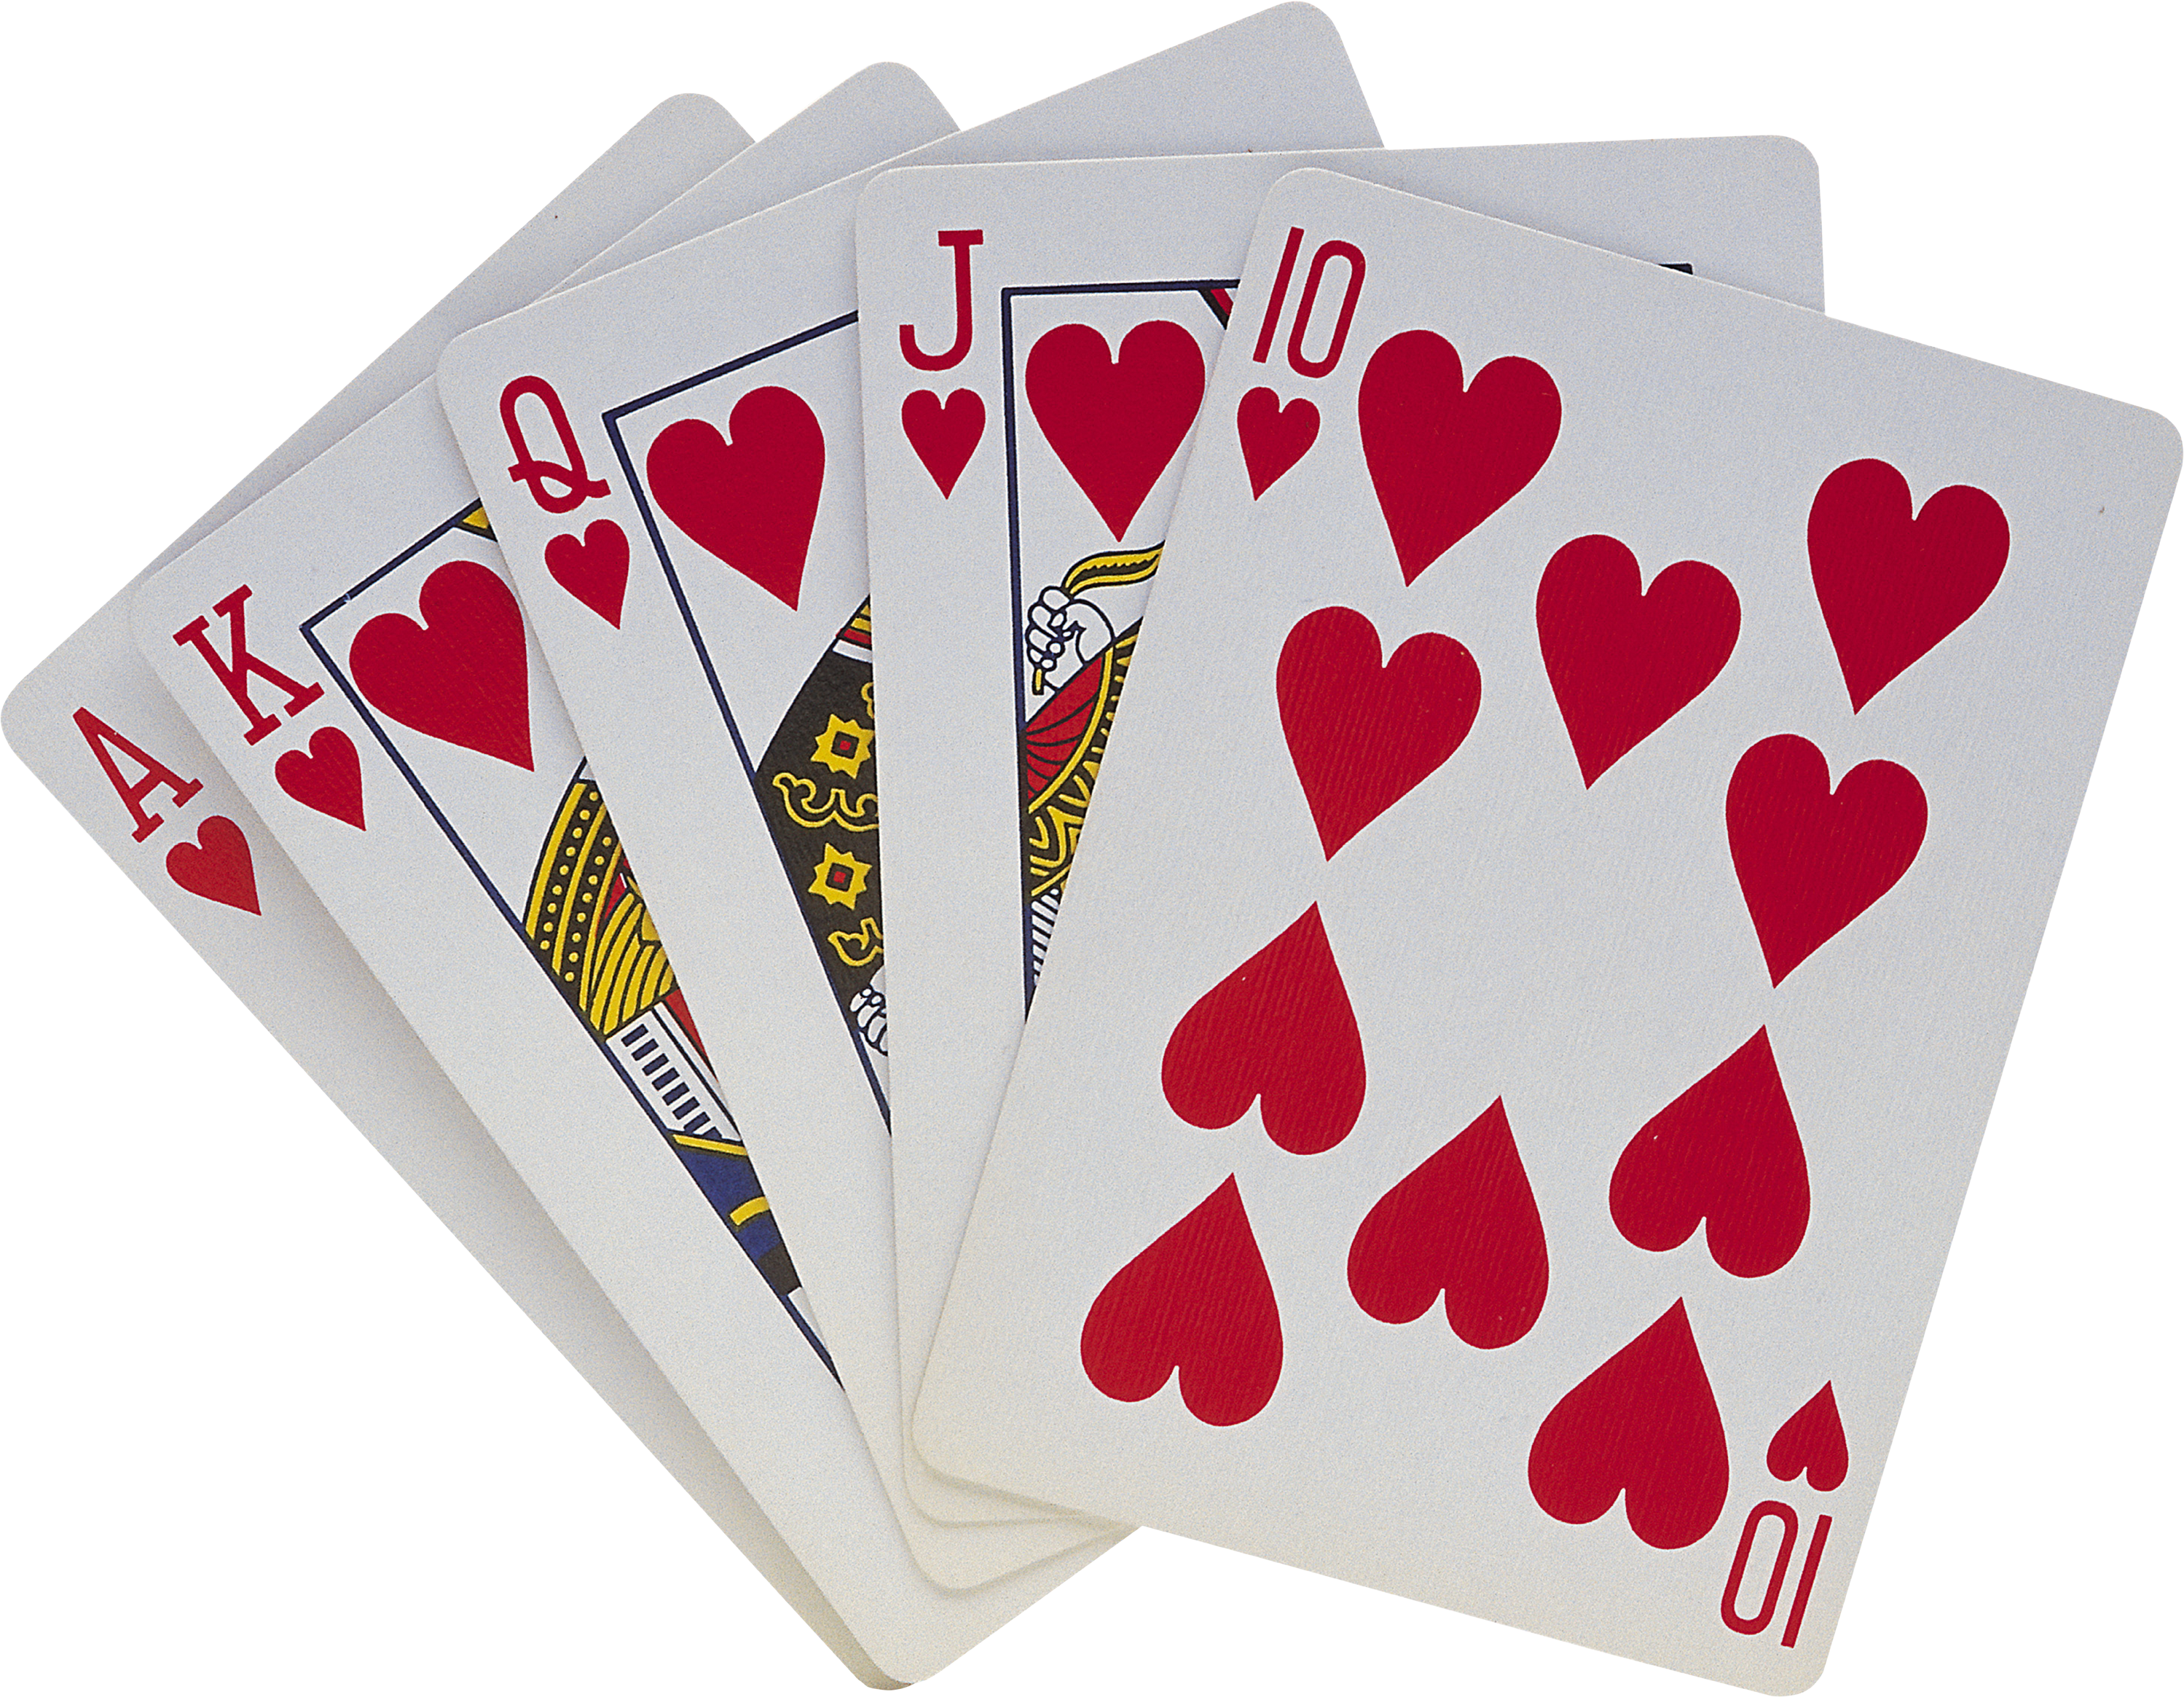 Cards PNG images free download, png card image